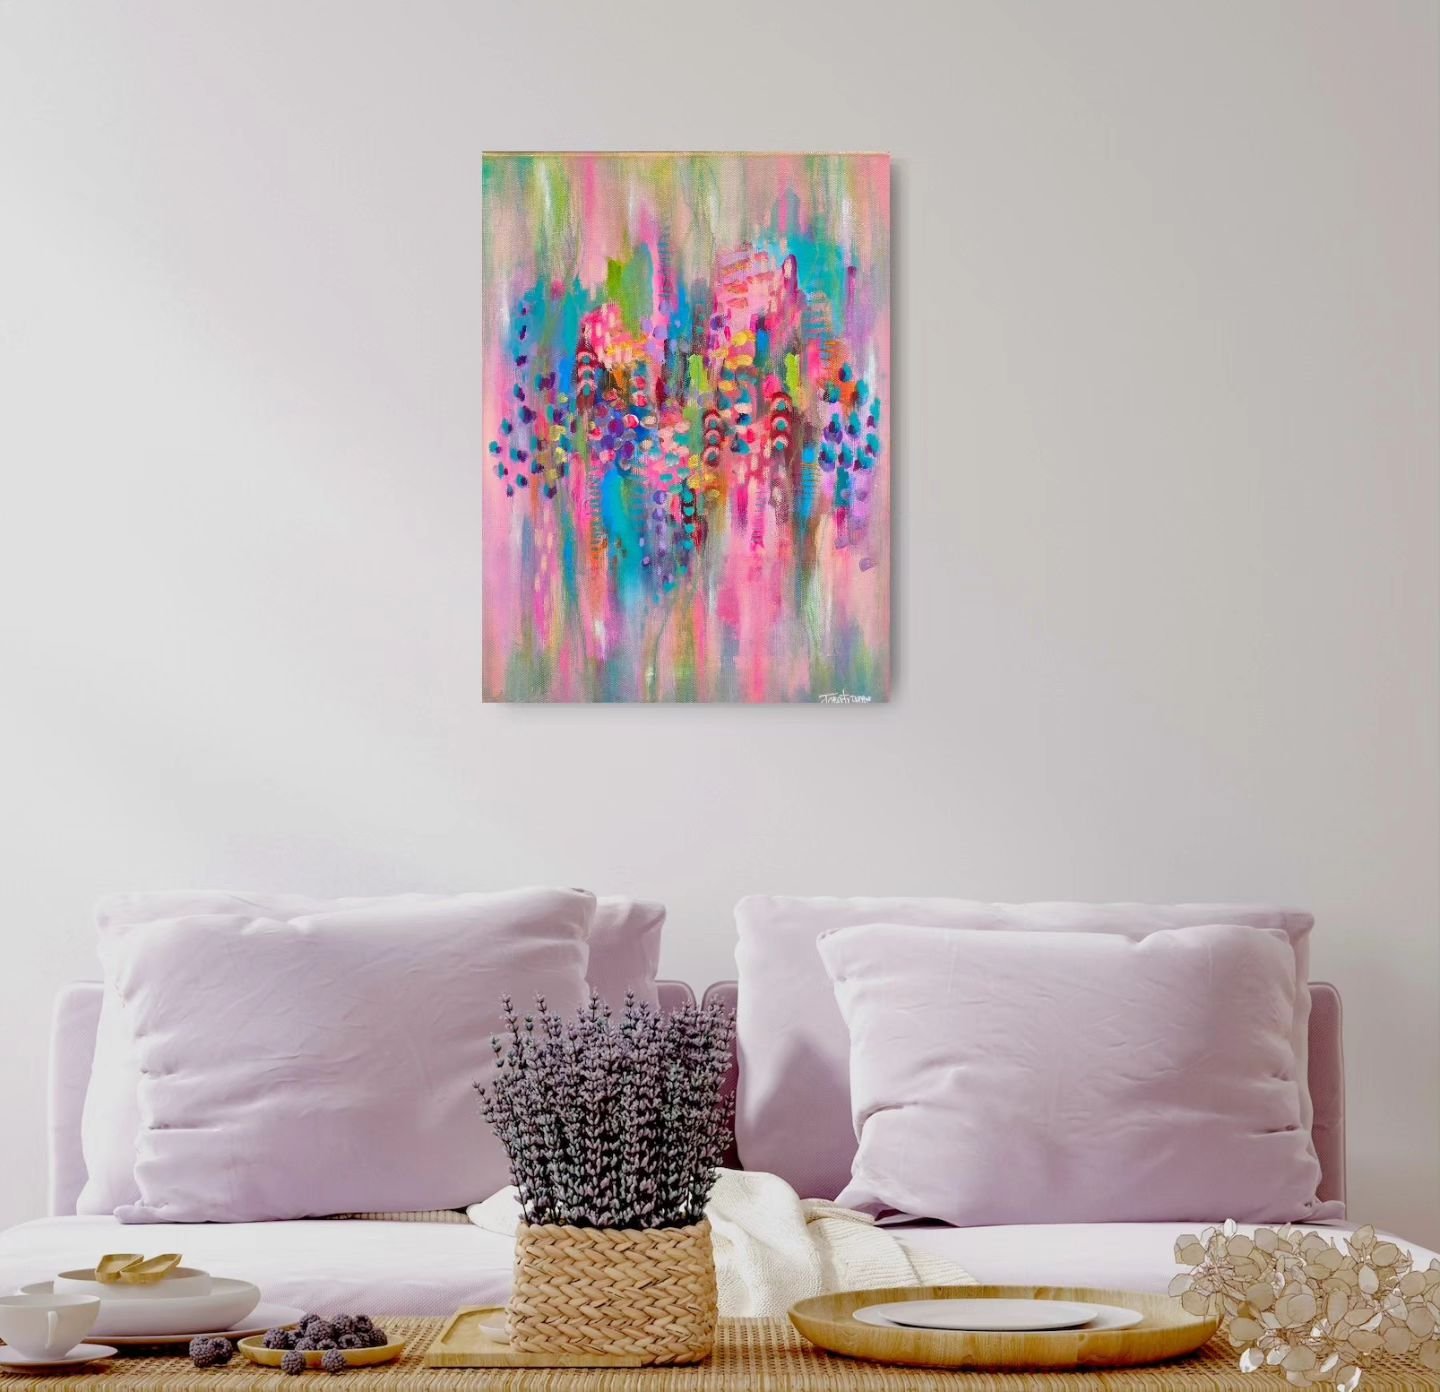 'Wisteria' is now available as an A3 print.  Get yours now at @ommademeetthemaker West Lakes or on my website (link in bio)

#fizzbubbleartanddesign #mothersdaygiftideas #art #artist #abstract #artprints #photodoesntdoitjustice #adelaideartist #adela